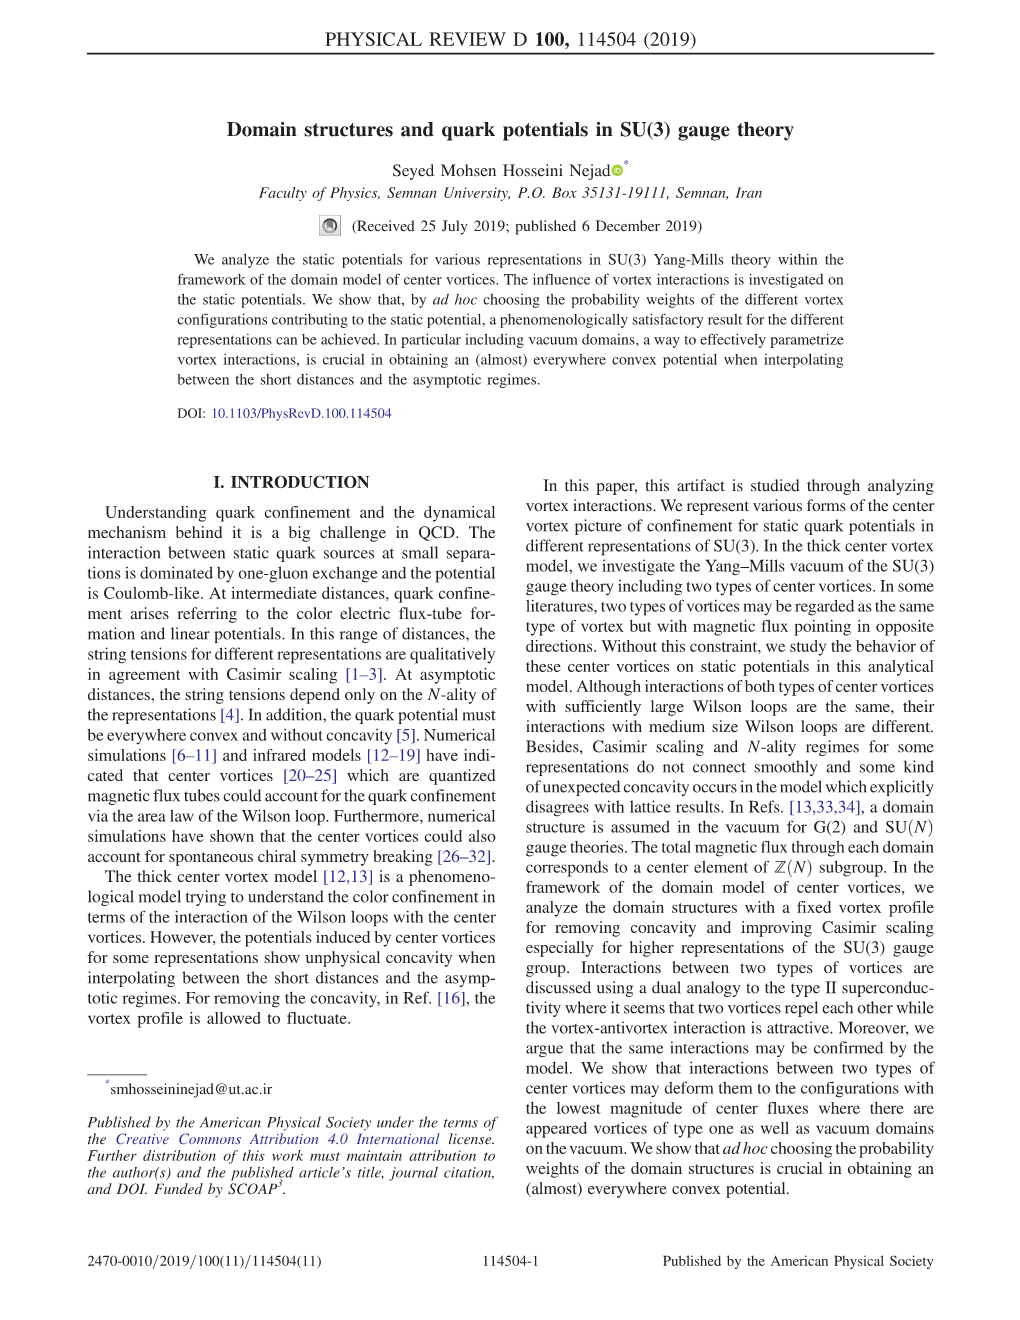 Domain Structures and Quark Potentials in SU(3) Gauge Theory